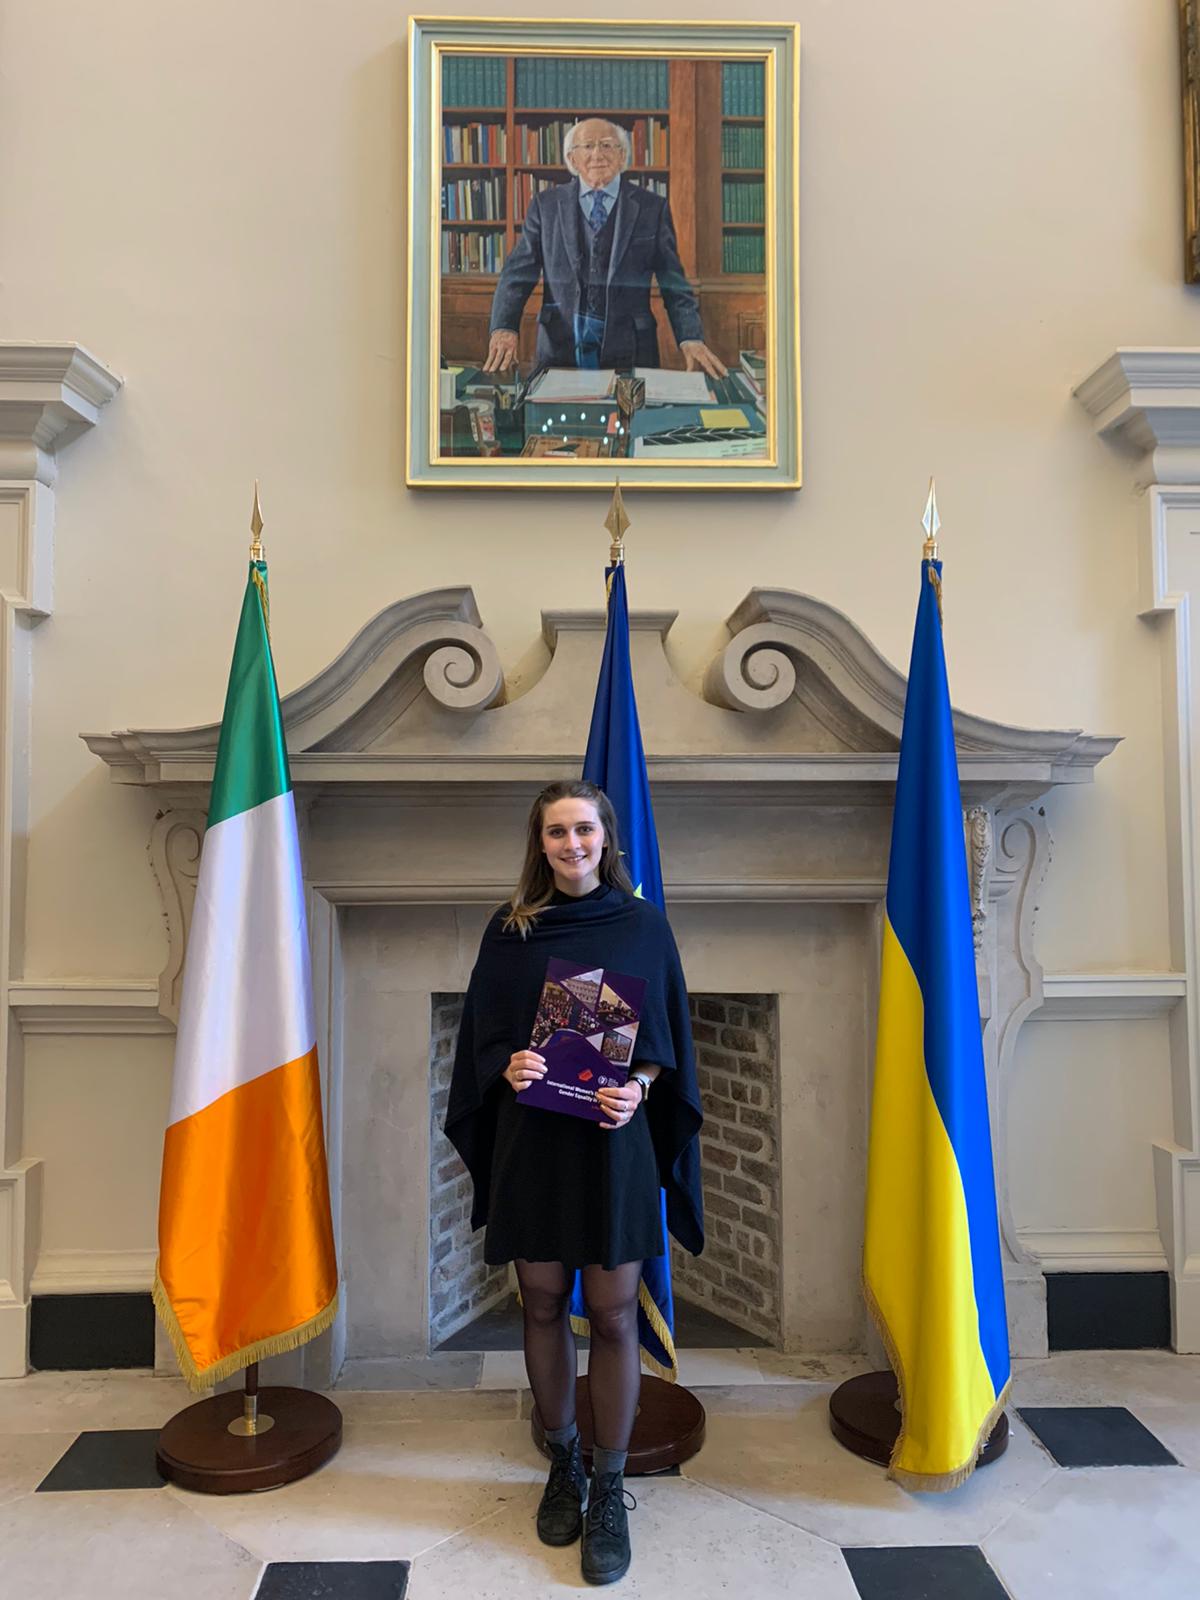 Caoimhe Newell in Houses of the Oireachtas standing in front of a decorative fireplace, Irish flags and a portrait of the president.